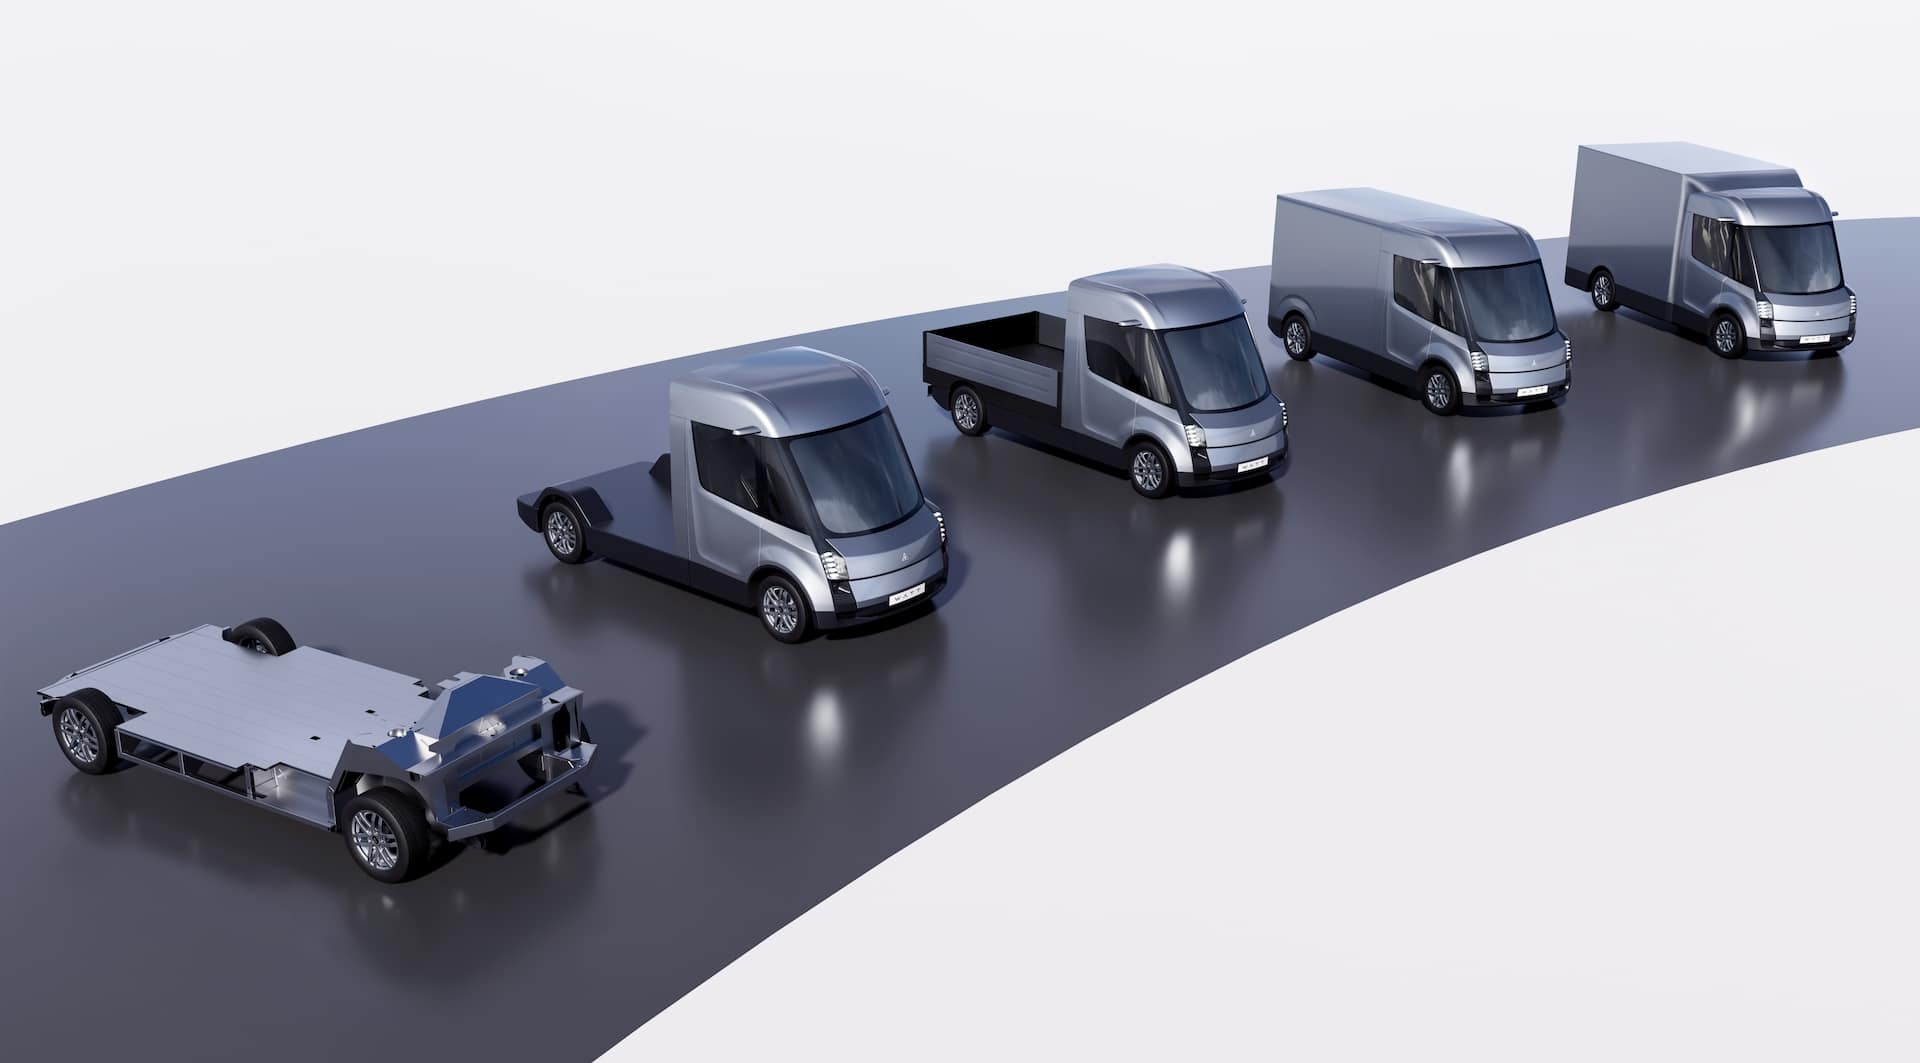 Watt Electric Vehicle Company Unveils Lightweight and Efficient Chassis-Cab for Next-Gen Electric Commercial Vehicles